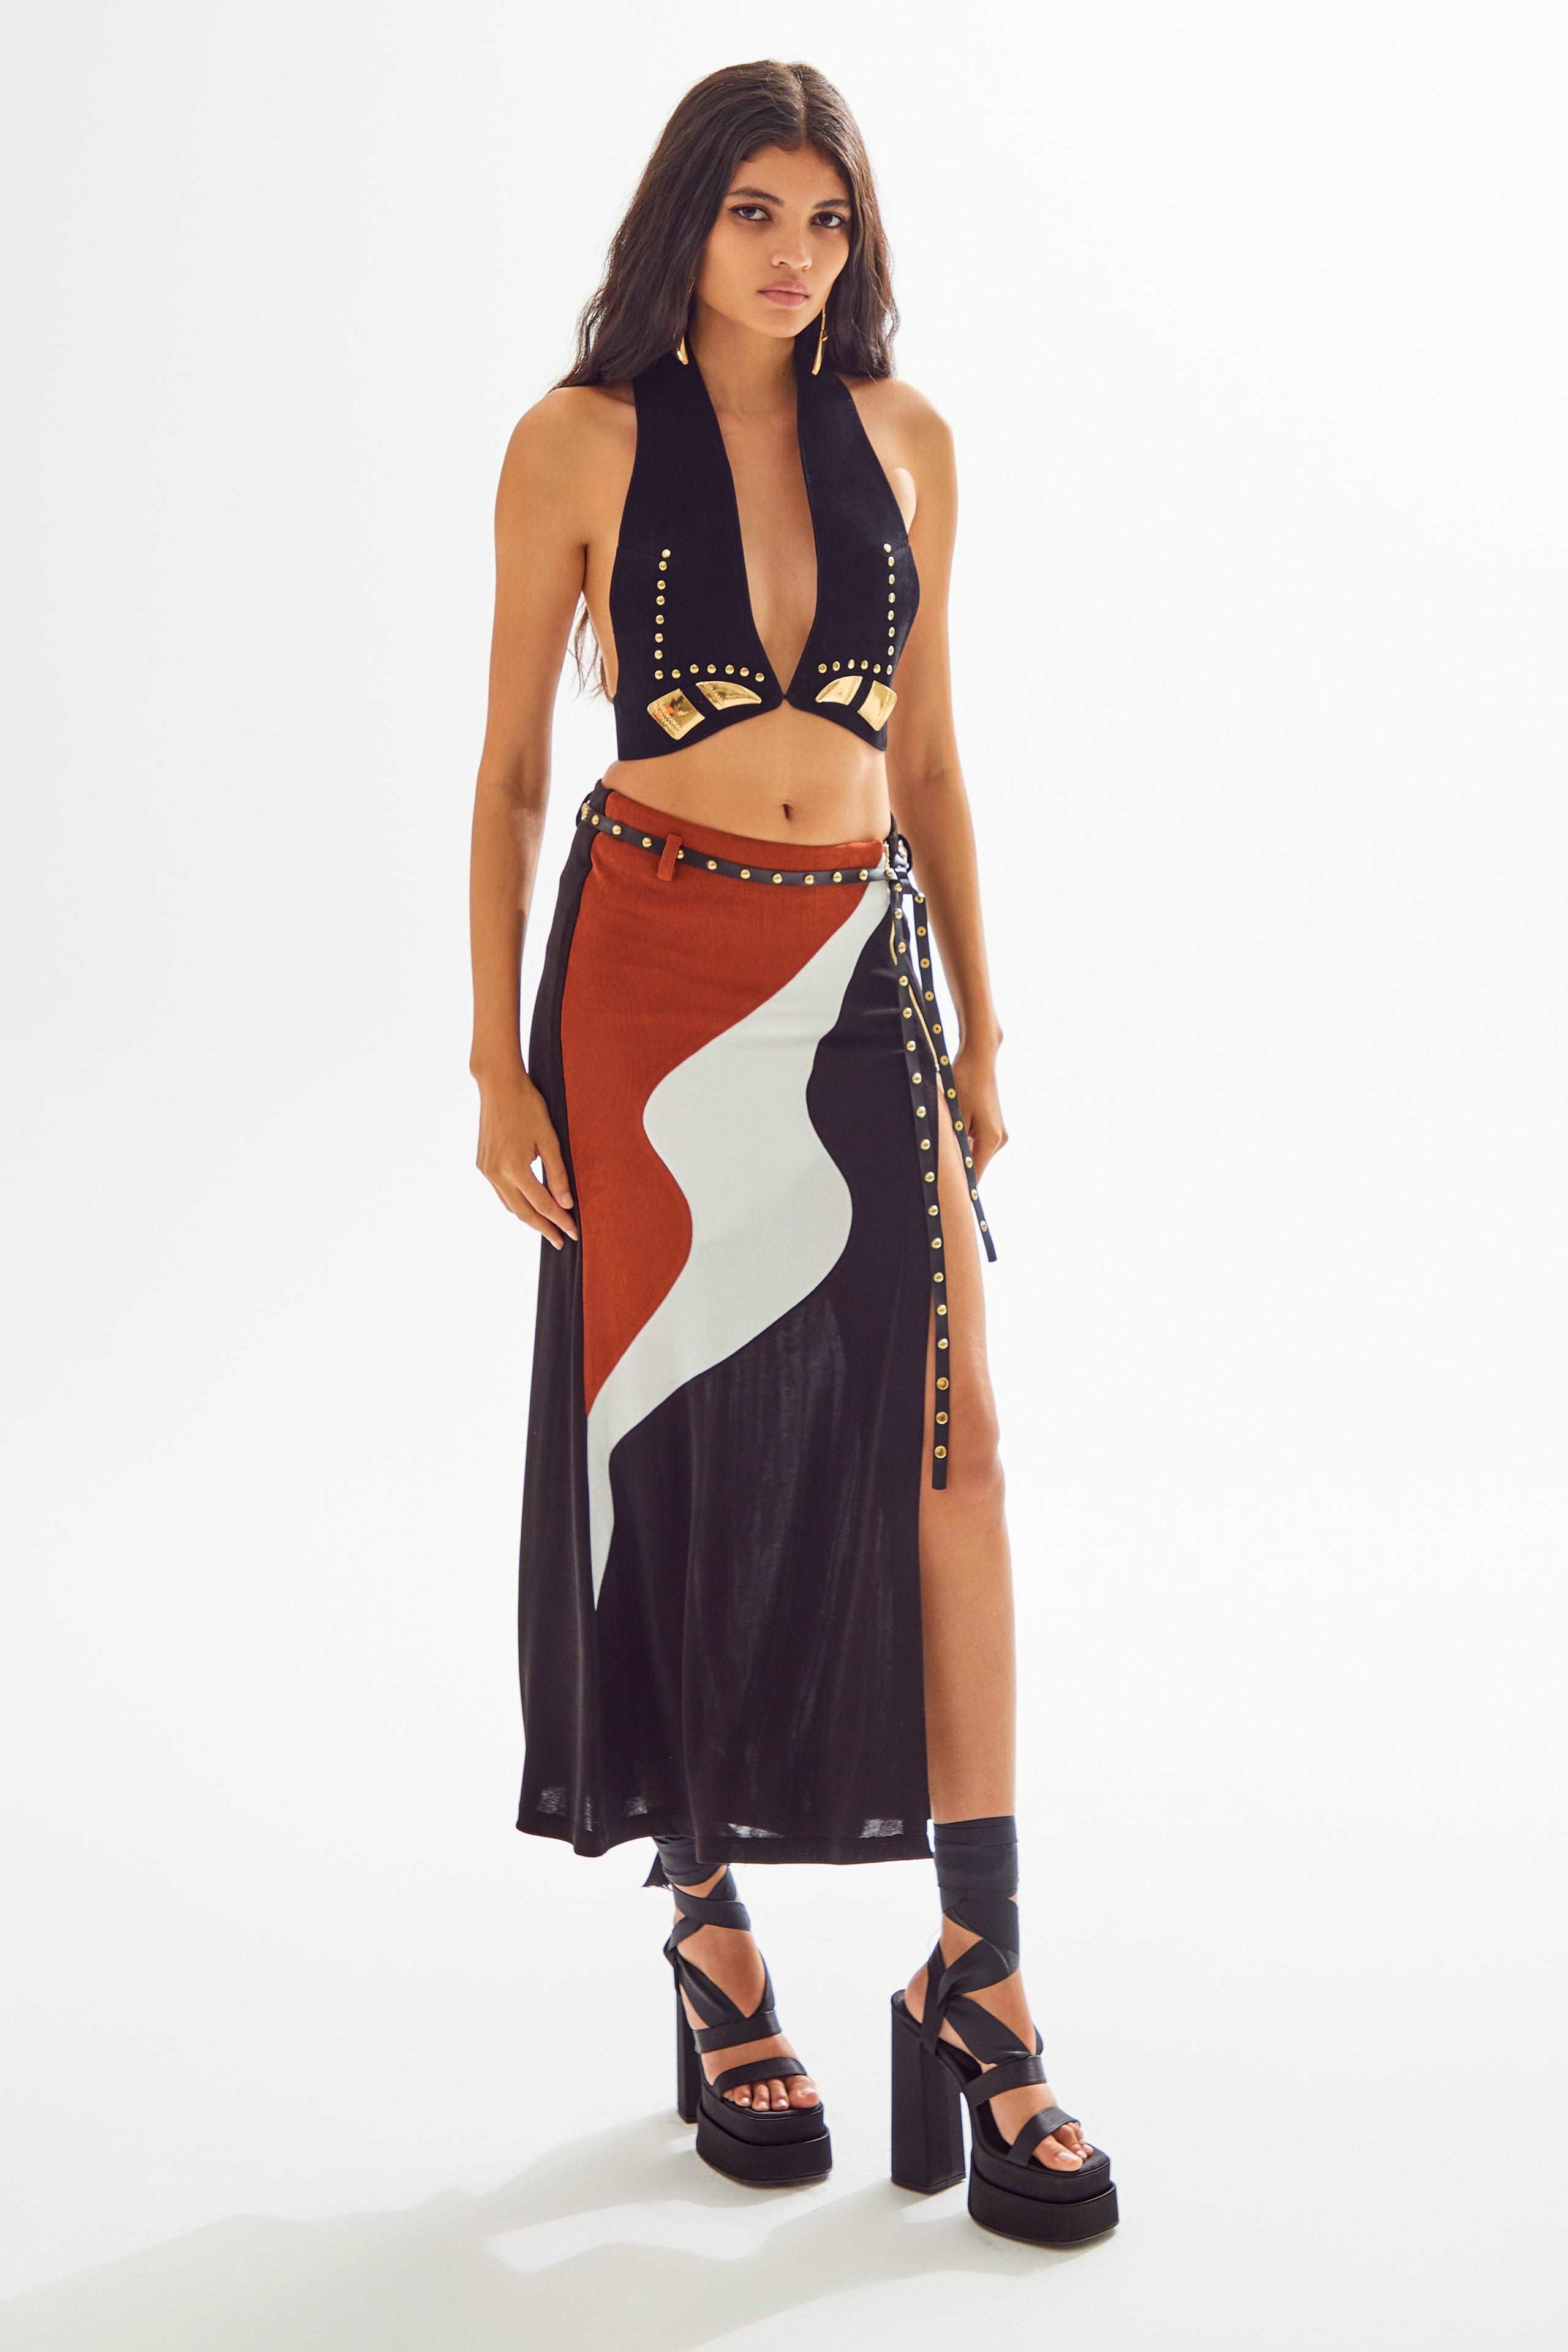 African Colour Blocked Midi Skirt with High Slit